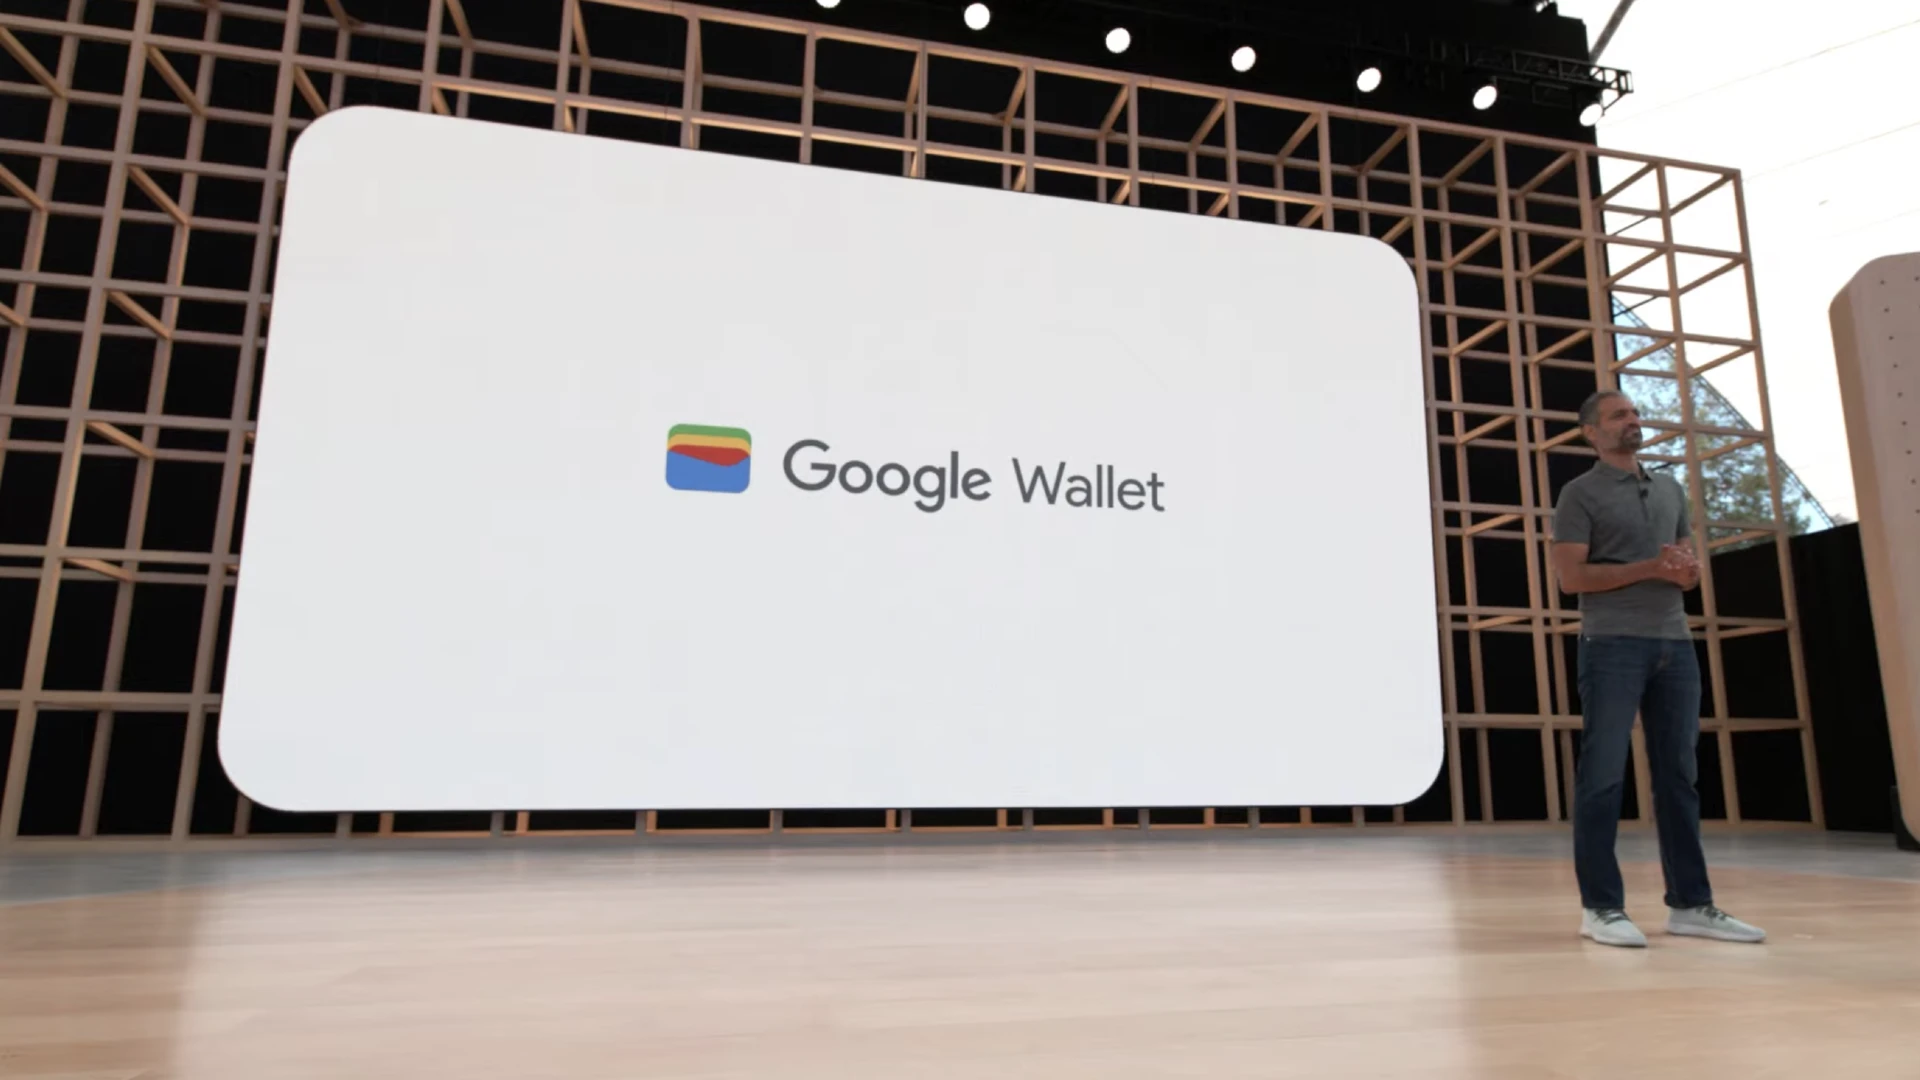 Google introduces Google Wallet for Android